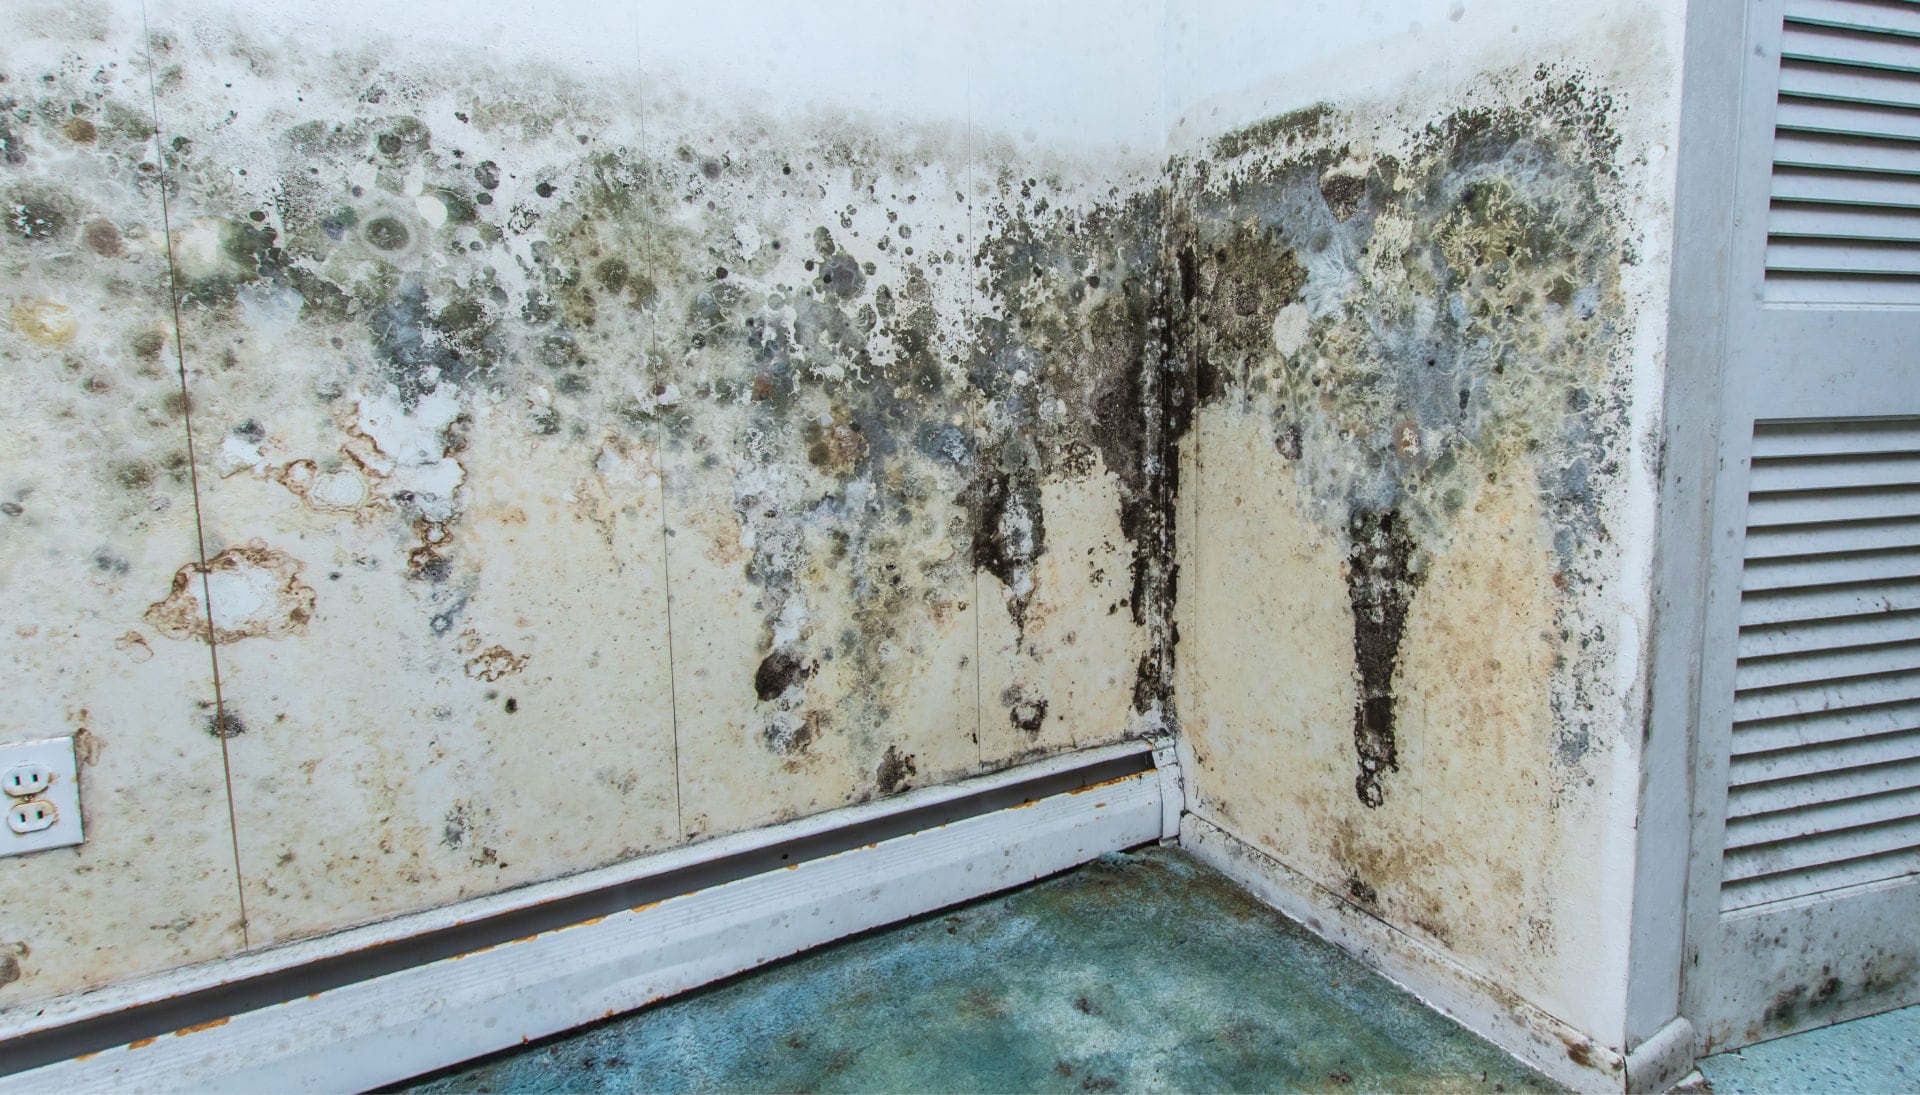 Professional mold removal, odor control, and water damage restoration service in Winnipeg, Missouri.